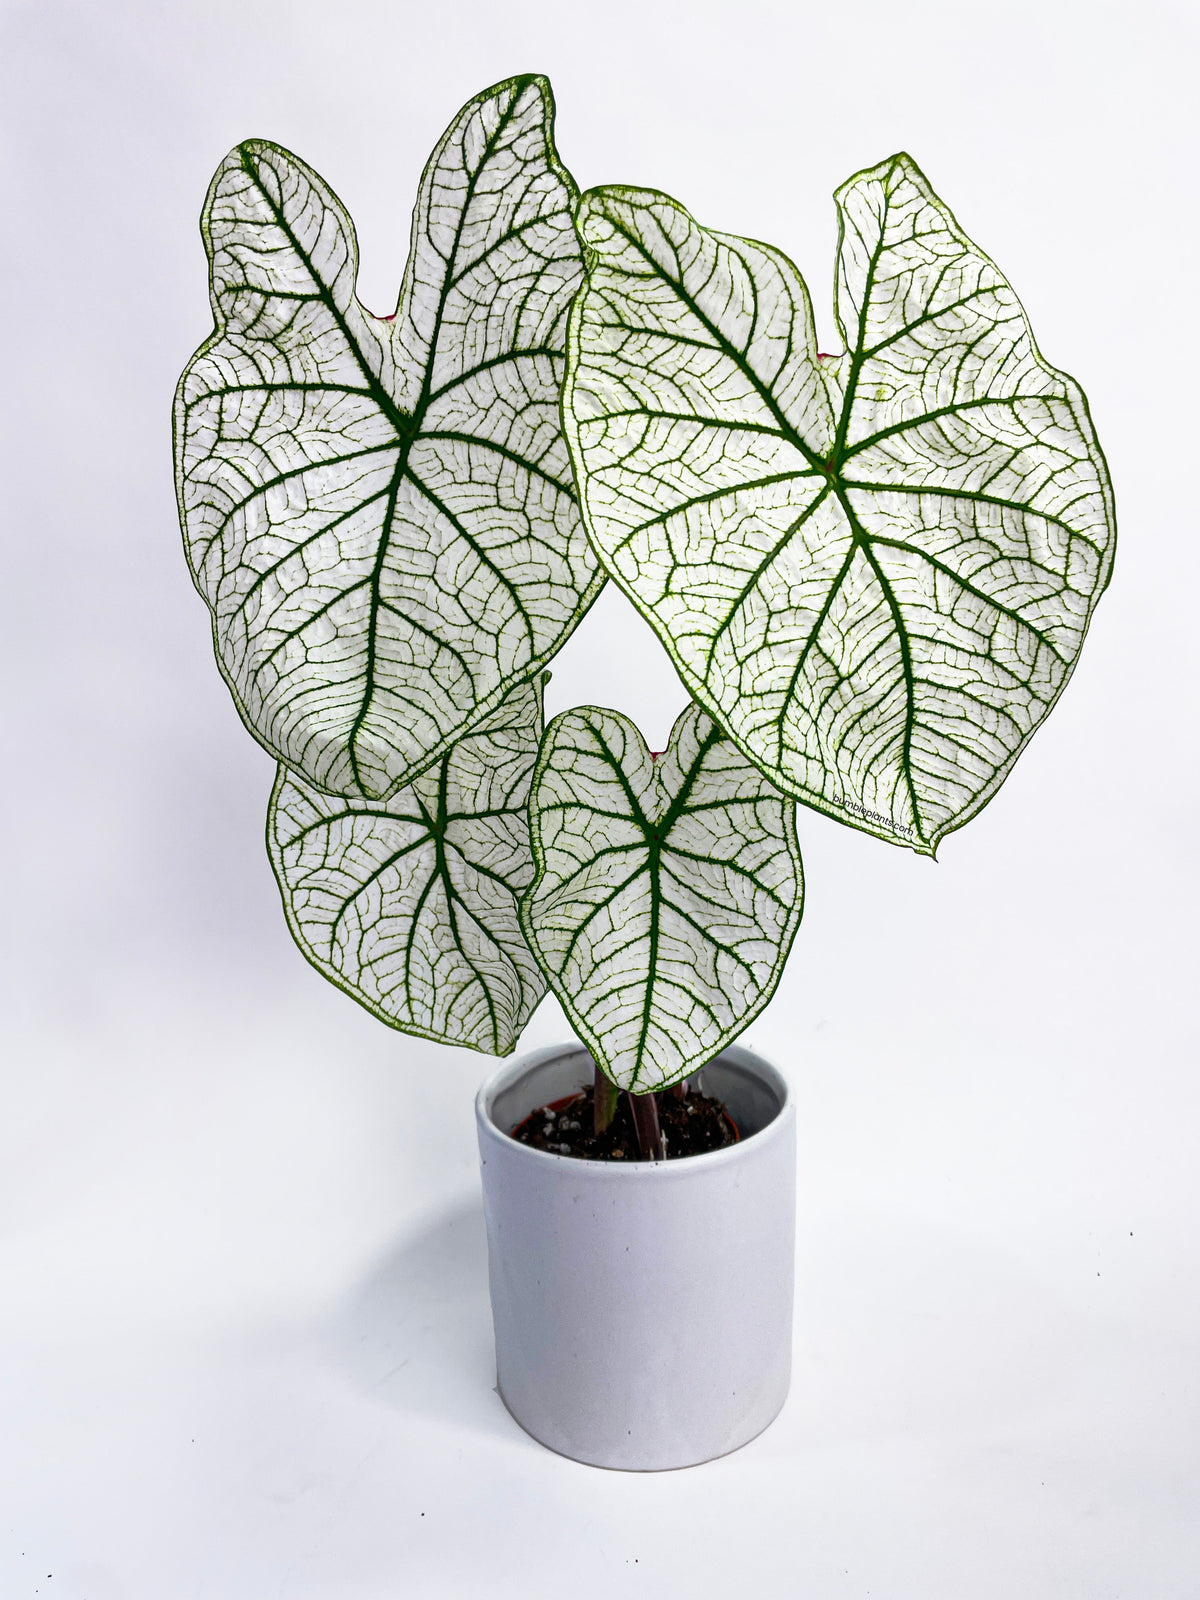 Caladium 'White Christmas' Butterfly Wings by Bumble Plants